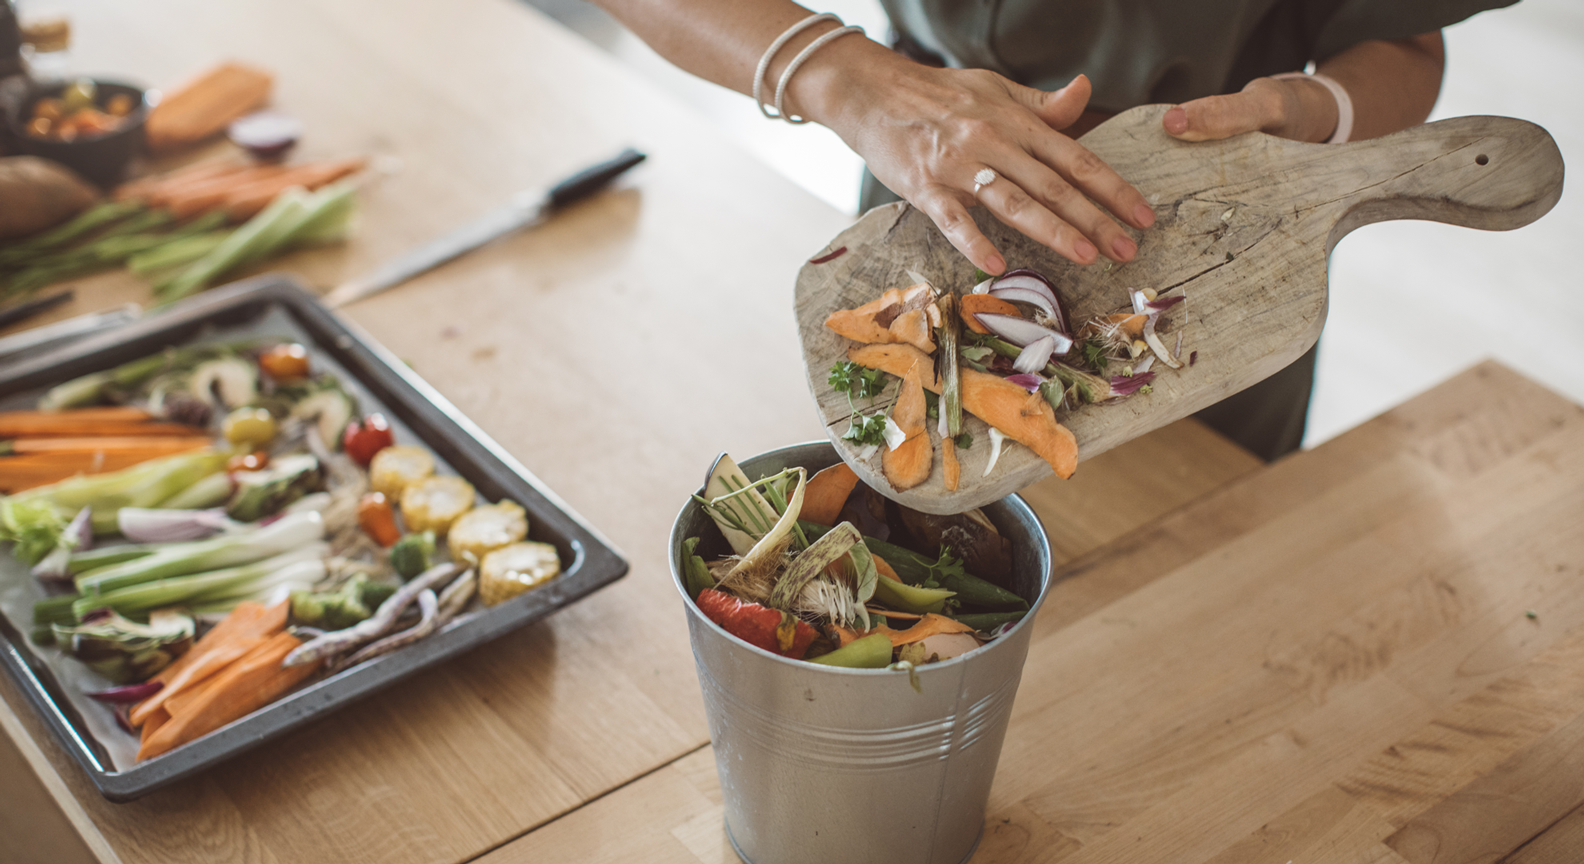 A persons hand pushing food waste from a chopping board into a food waste bin